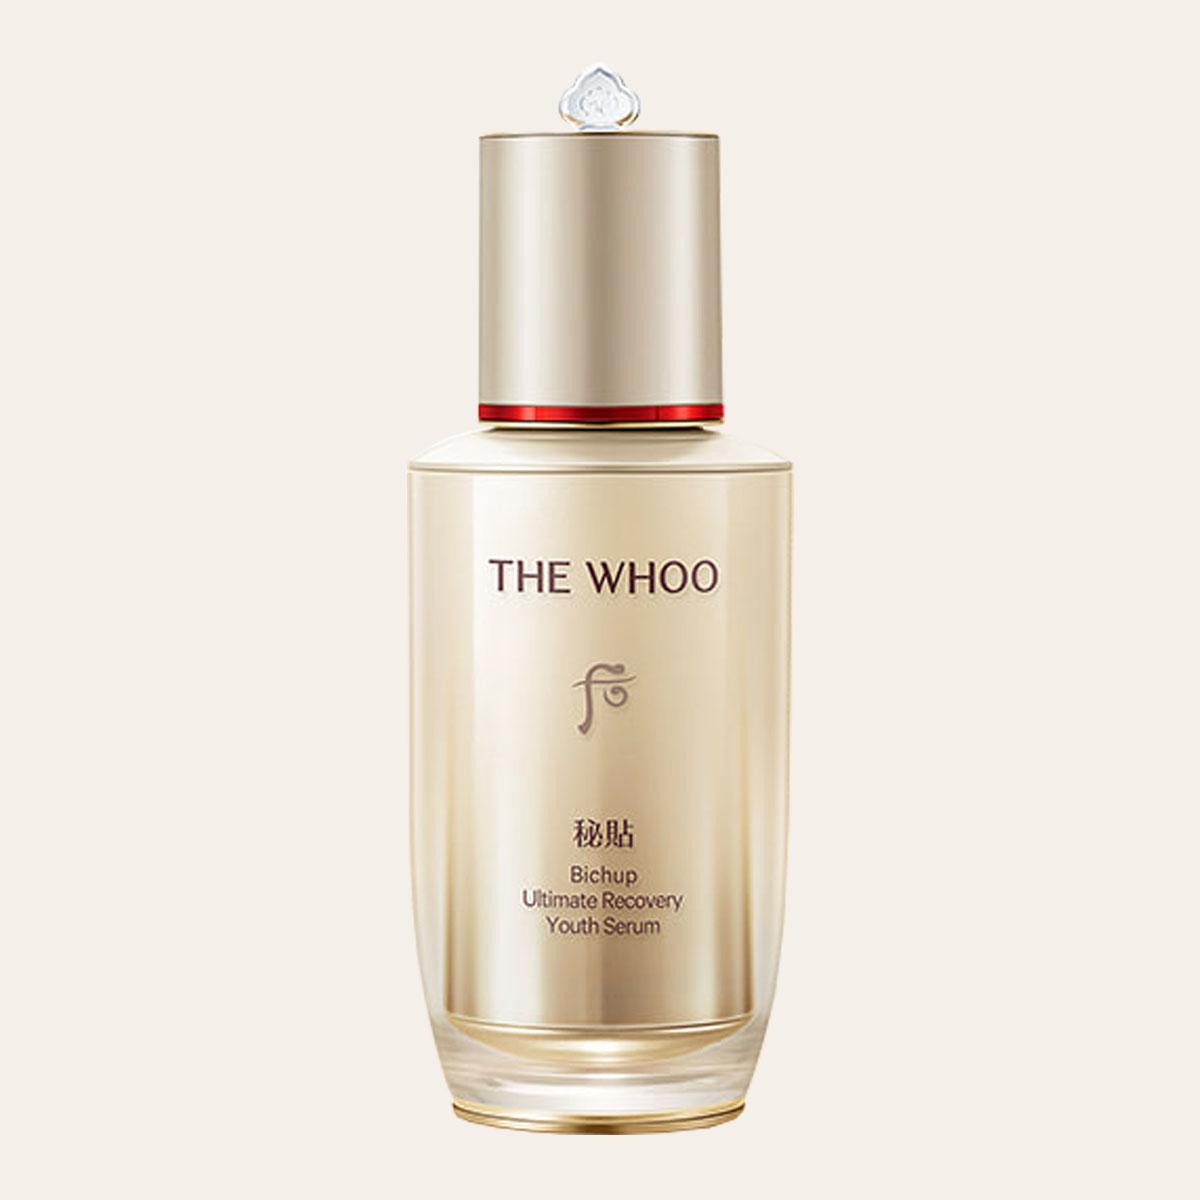 The History of Whoo - Bichup Ultimate Recovery Youth Serum